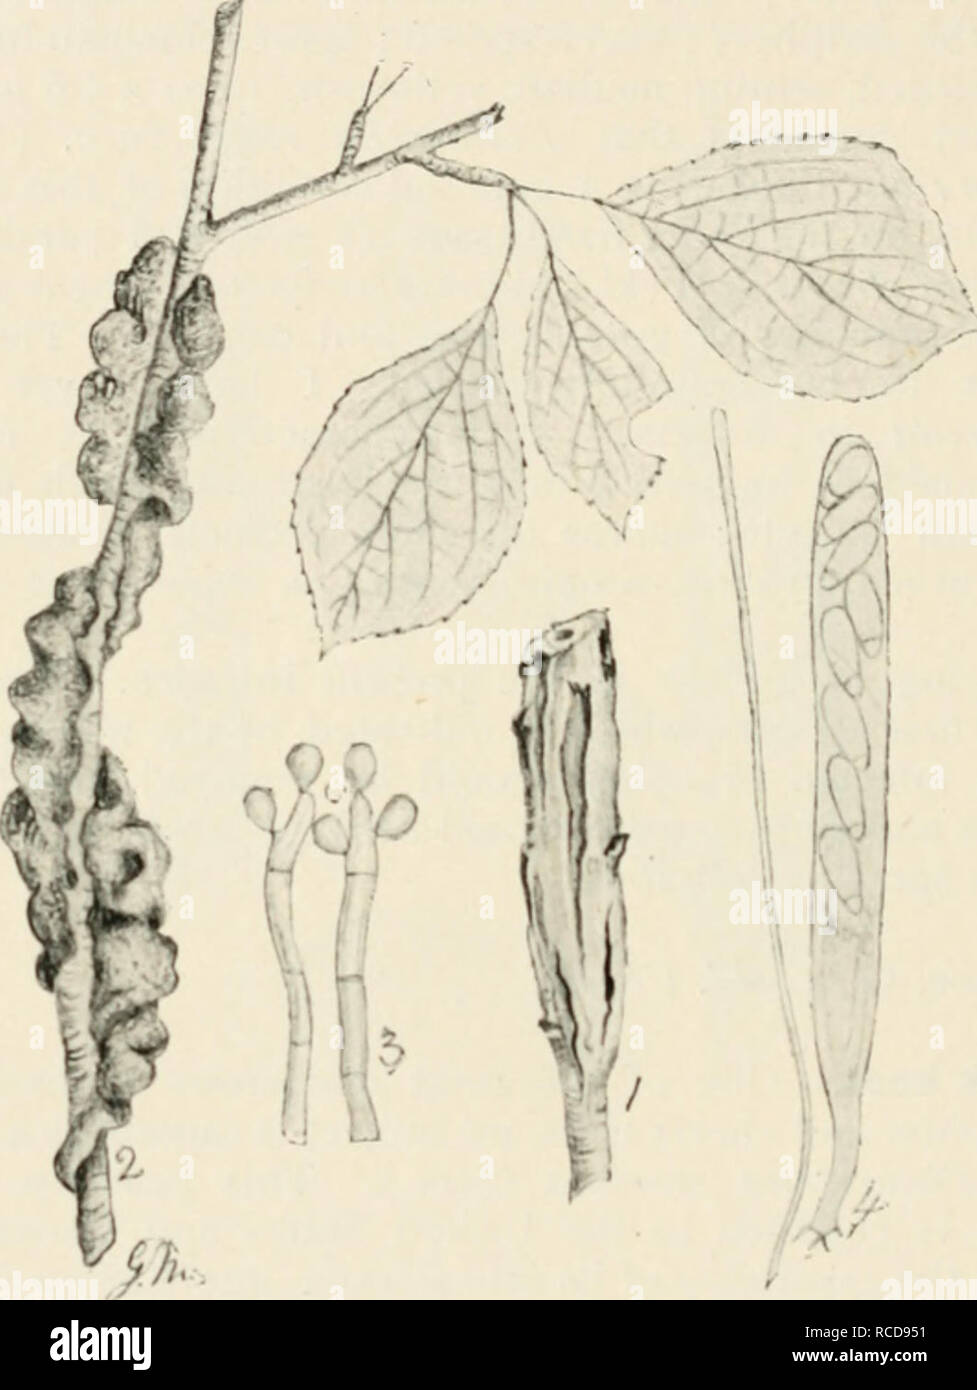 . Diseases of cultivated plants and trees. Plant diseases; Plants -- Wounds and injuries; Plants, Protection of; Trees -- Diseases and pests. 214 DISEASES OF CULTIVATED PLANTS conidia elliptical, olive, about i6 /x long. Pycnidia resembling the perithecia, containing elliptical pale yellow, 3-septate stylospores, 10-12x6-7 /x. Spermogonia also similar to the perithecia, producing very minute spermatia. Perithecia crowded, asci cvlindric-ovate, 110-150x16-18 fx; spores. Fig. 61.—Plowrightia mcrhosa. i, portion of a plum branch, showing conidial stage of the fungus; 2, branch with ascigerous con Stock Photo